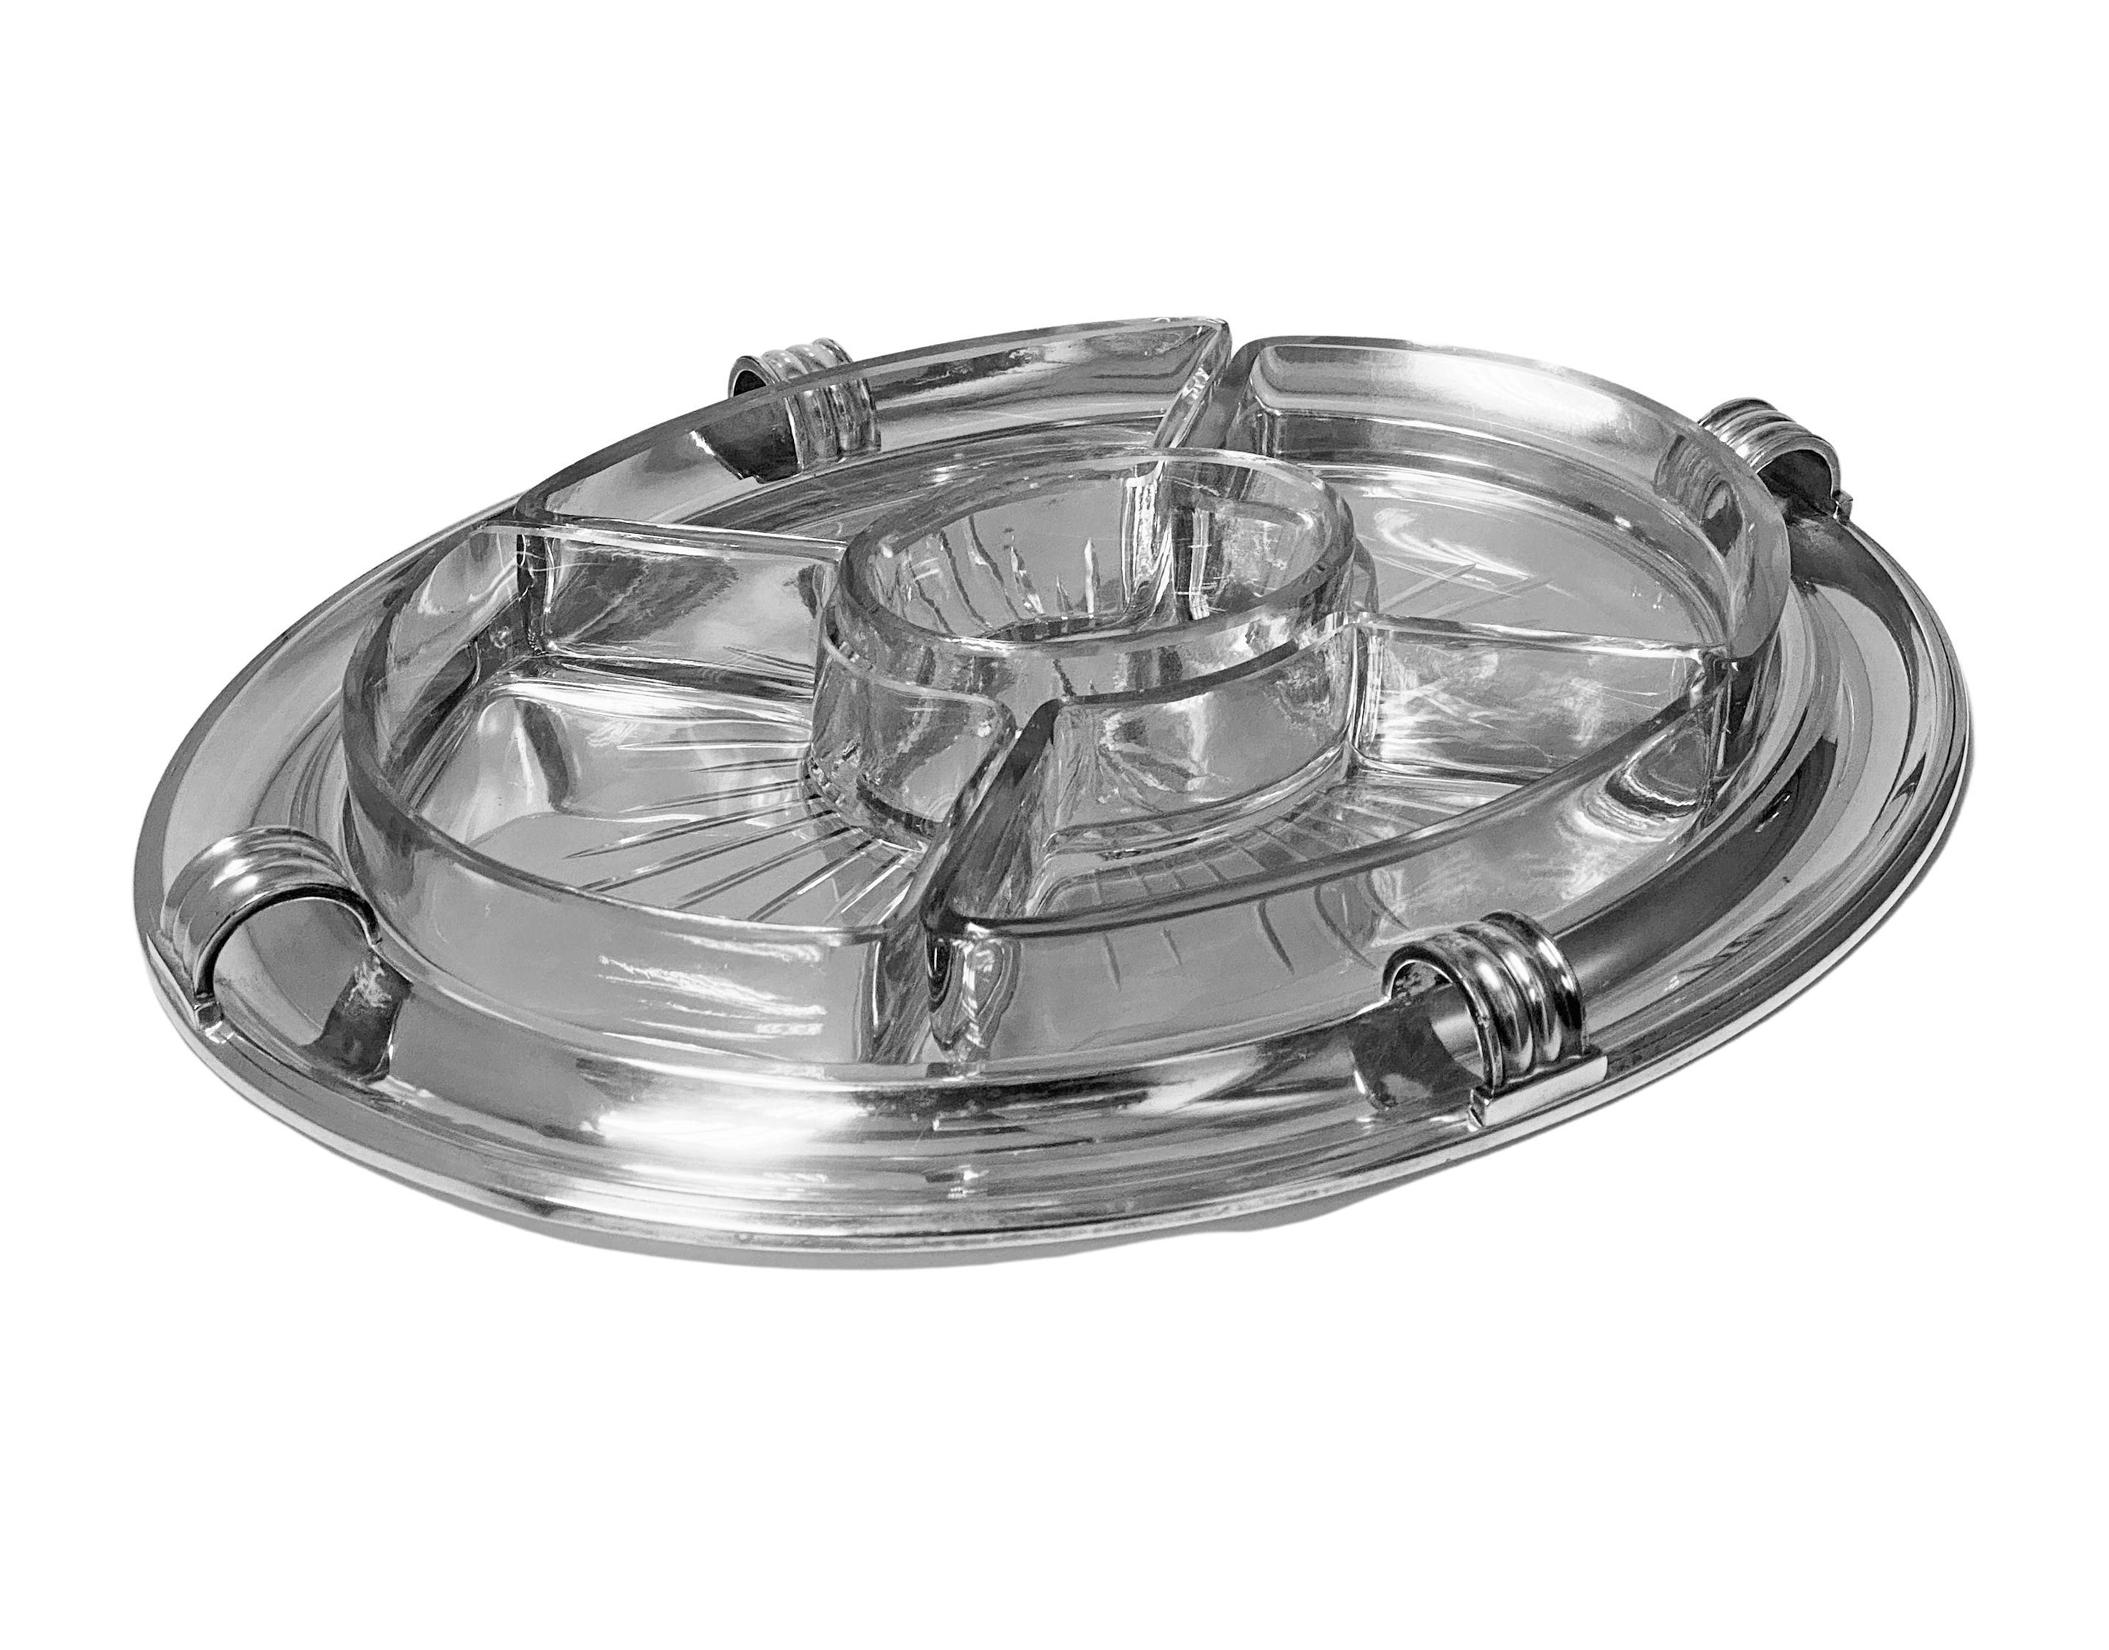 Large Christofle Art Deco Hors d'Oeuvres Platter Dish C.1935, probably Luc Lanel design. The oval shaped centrepiece dish platter complete with five sectional star cut glass individual dishes, the centre oval dish with silver plate cover lid. All in